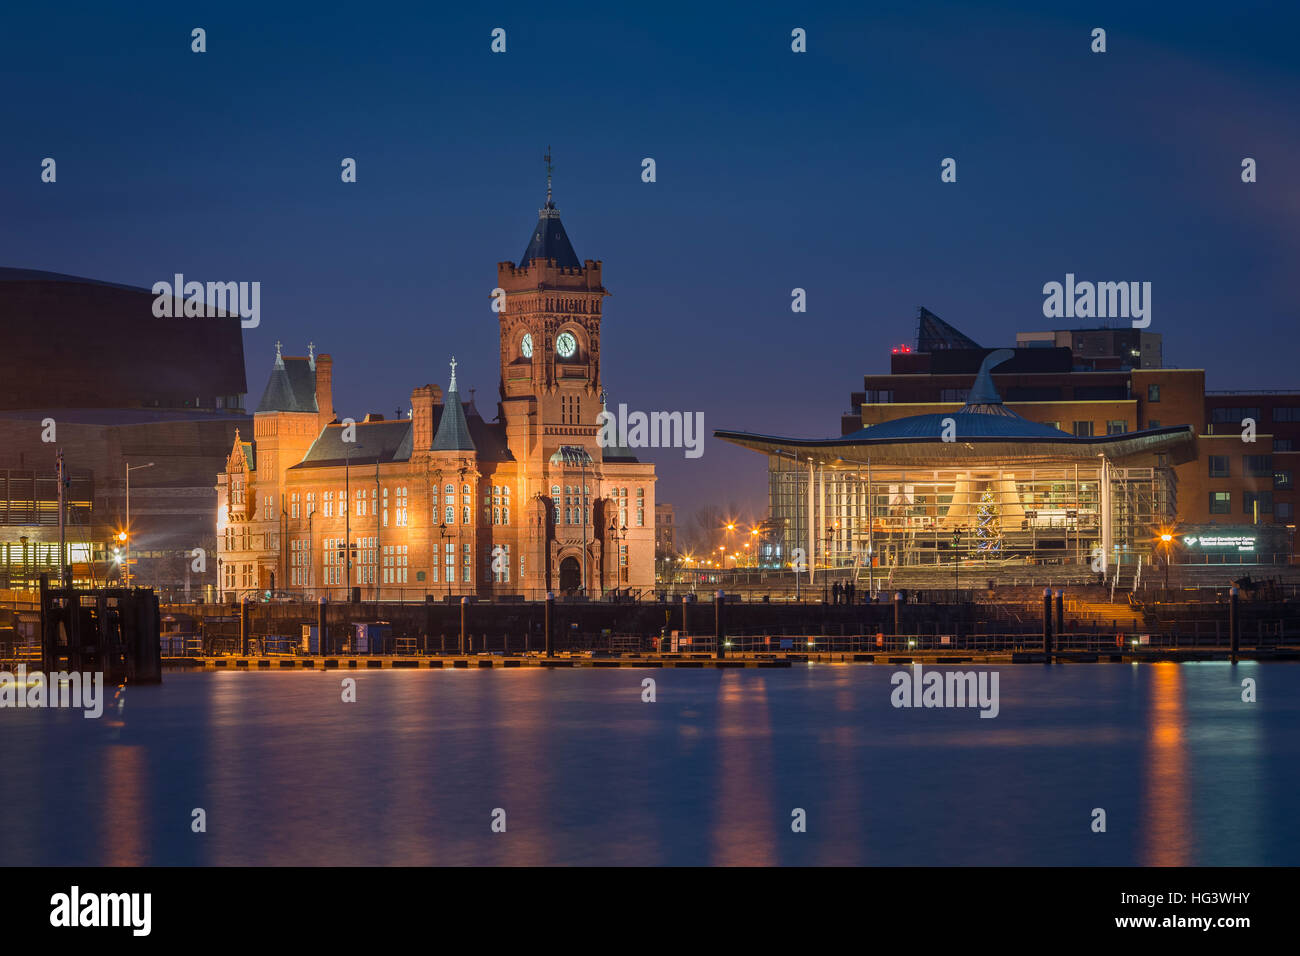 Pierhead building and Y Senedd (Welsh Assembly building) lit at night, Cardiff Bay, Glamorgan, Wales, UK Stock Photo